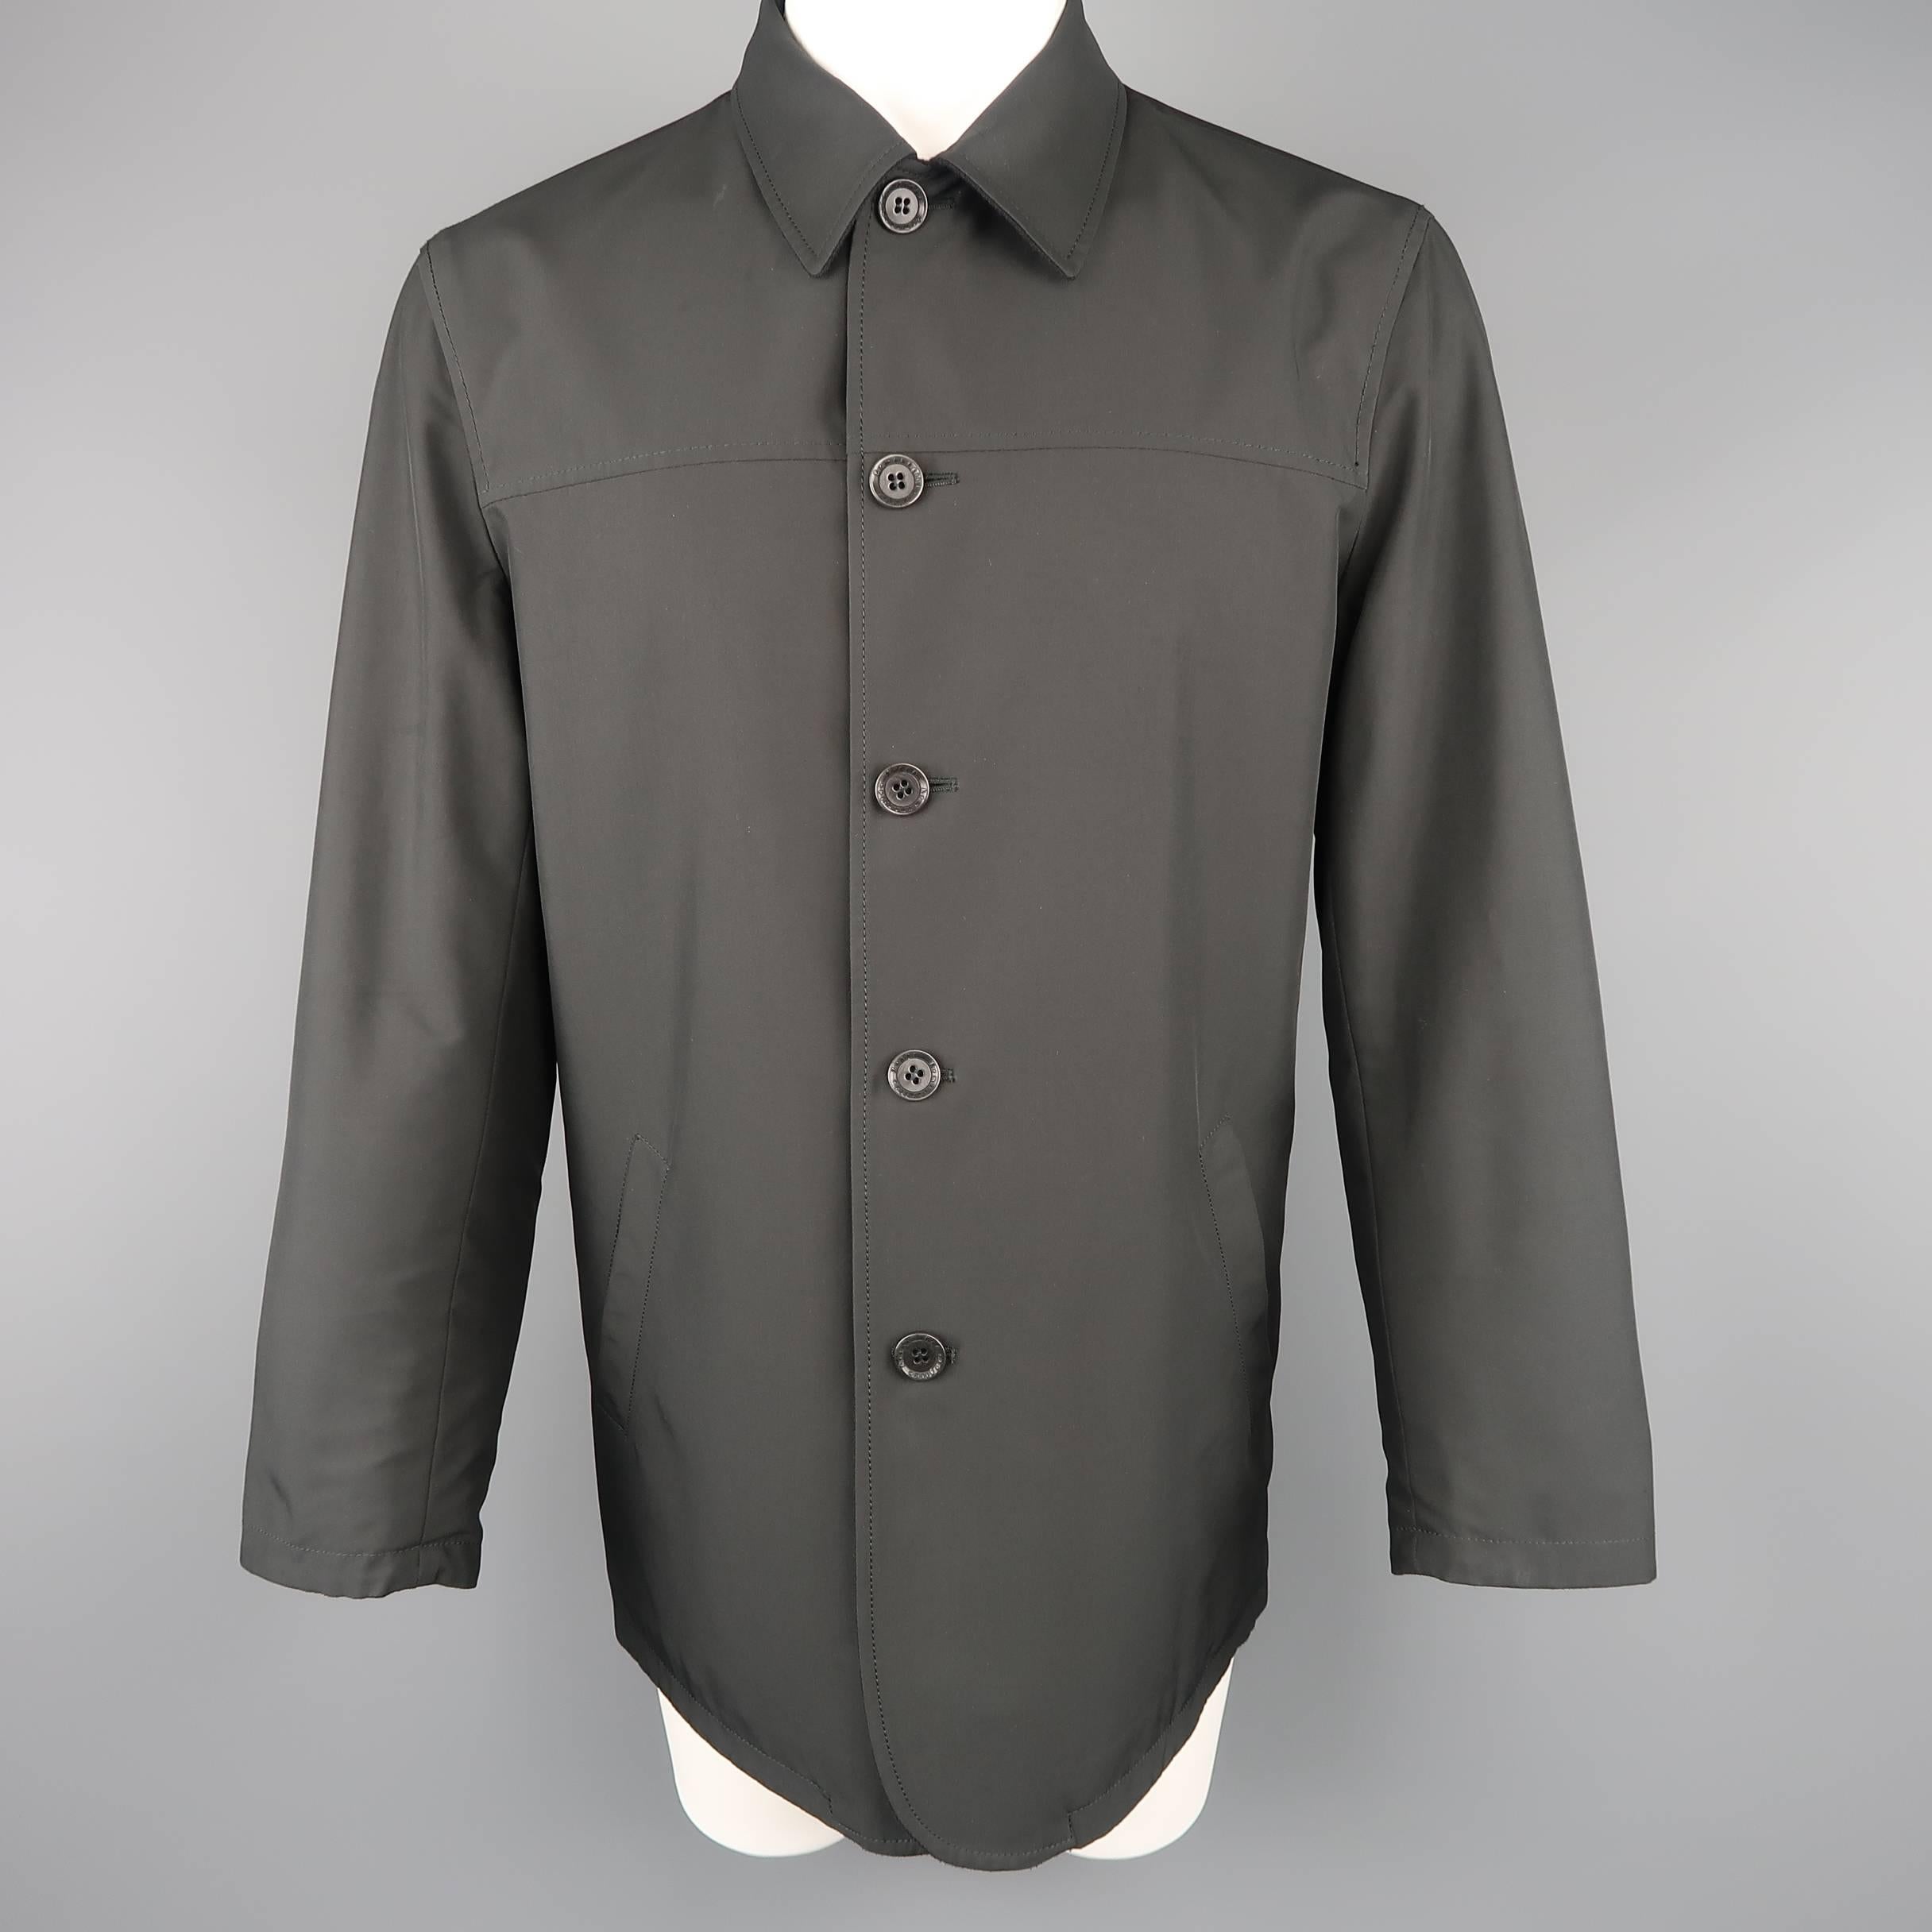 Reversible ERMENEGILDO ZEGNA car coat features a black wool cashmere side with pointed collar and patch pockets and a reverse nylon interior with slit pockets. Minor wear on nylon. Made in Italy.
 
Good Pre-Owned Condition.
Marked: S/48
